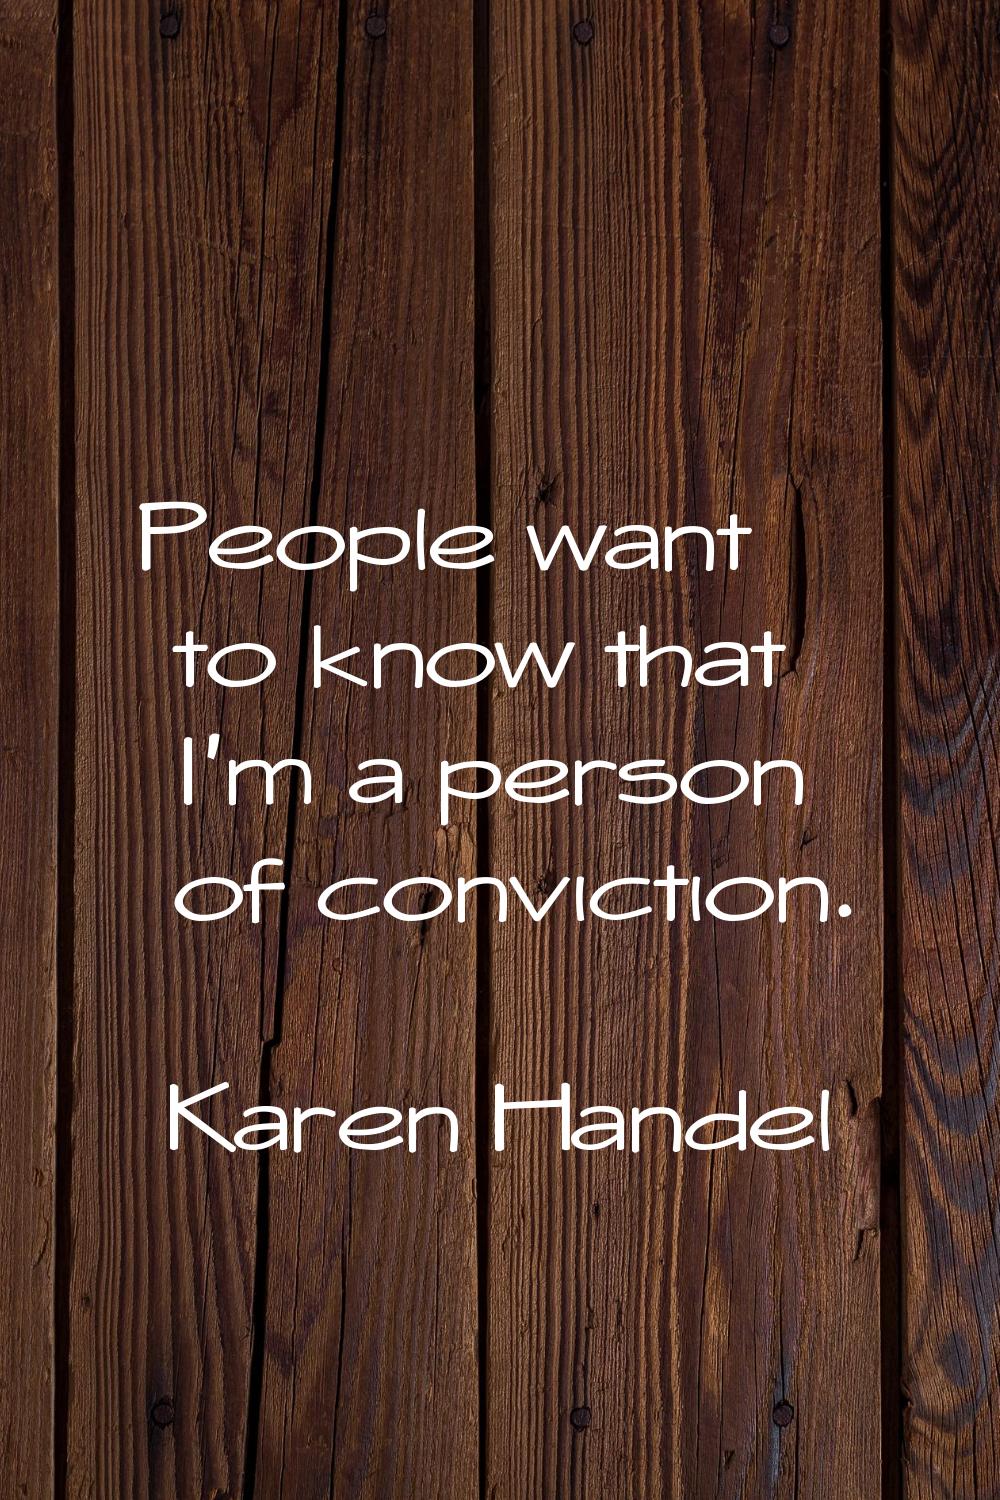 People want to know that I'm a person of conviction.